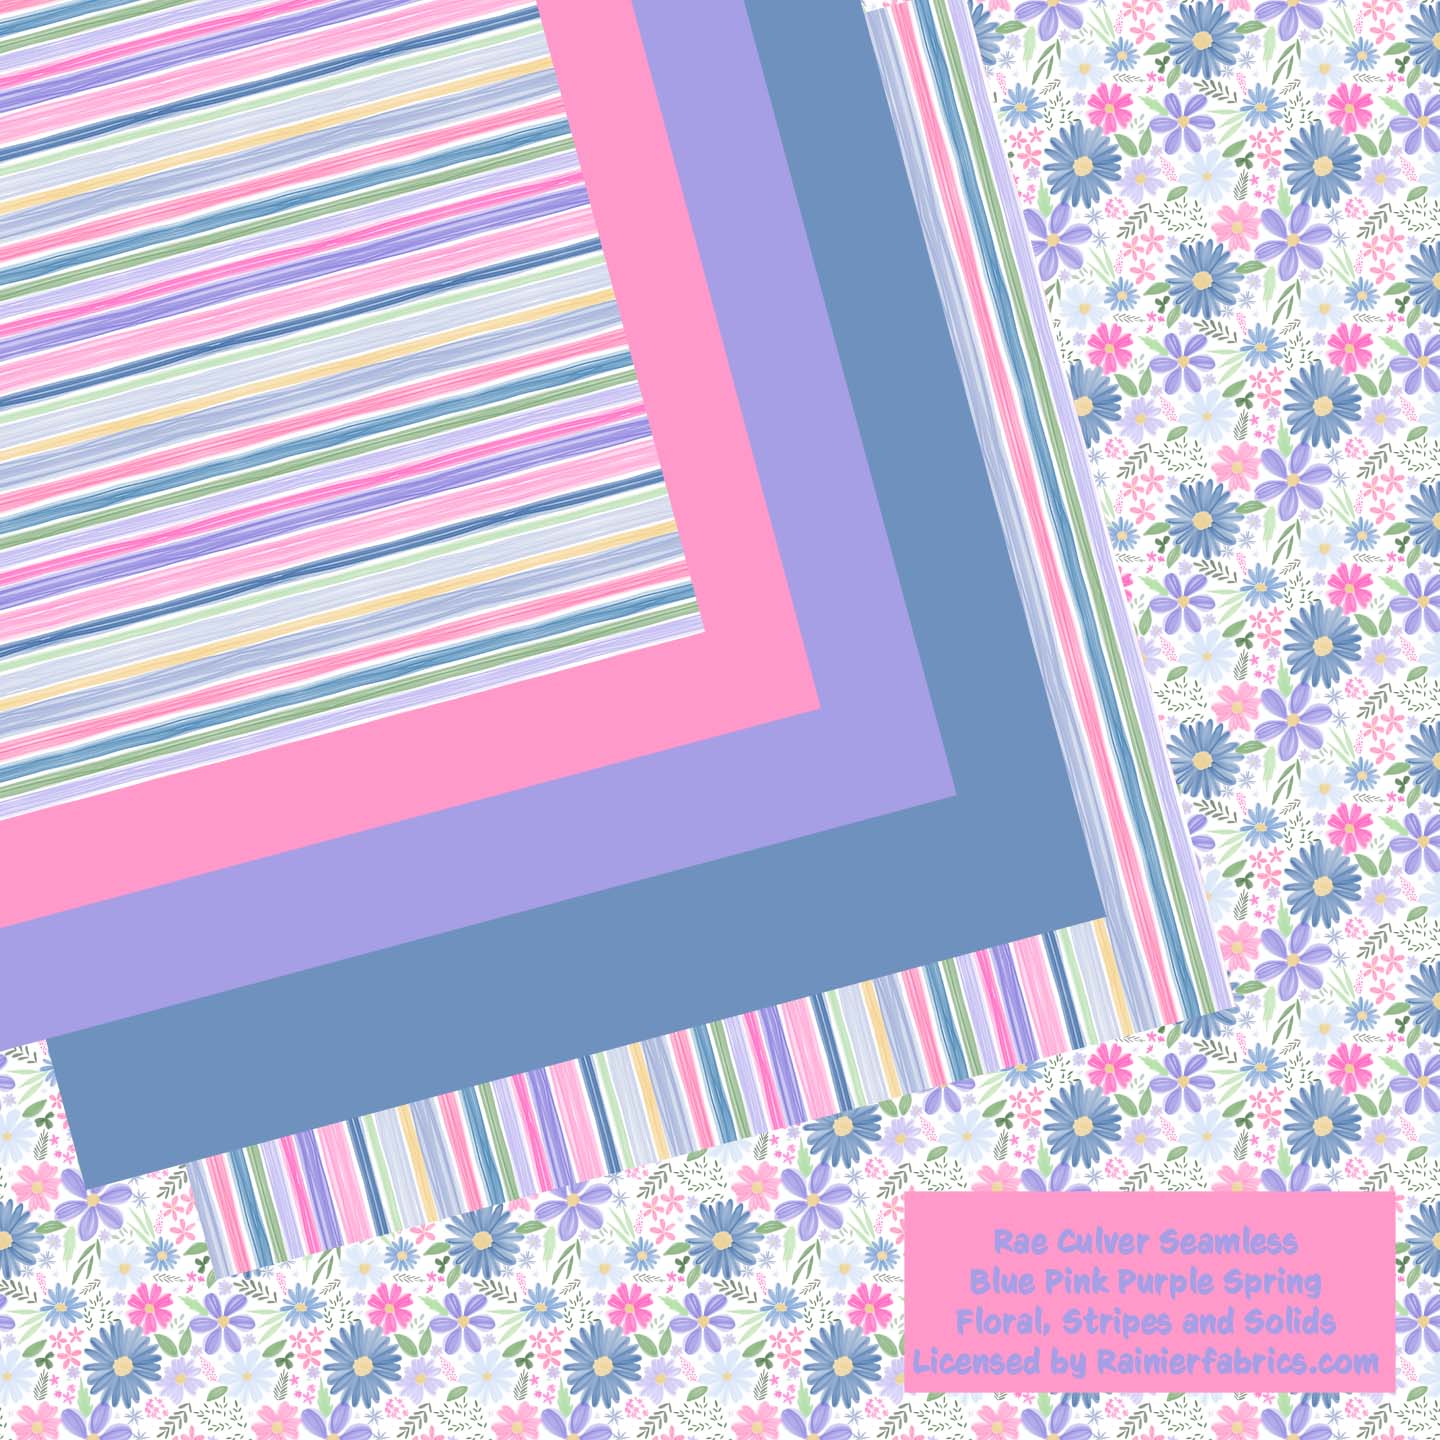 Blue, Pink, Purple Spring Floral, Stripes and Solids by Rae Culver Seamless